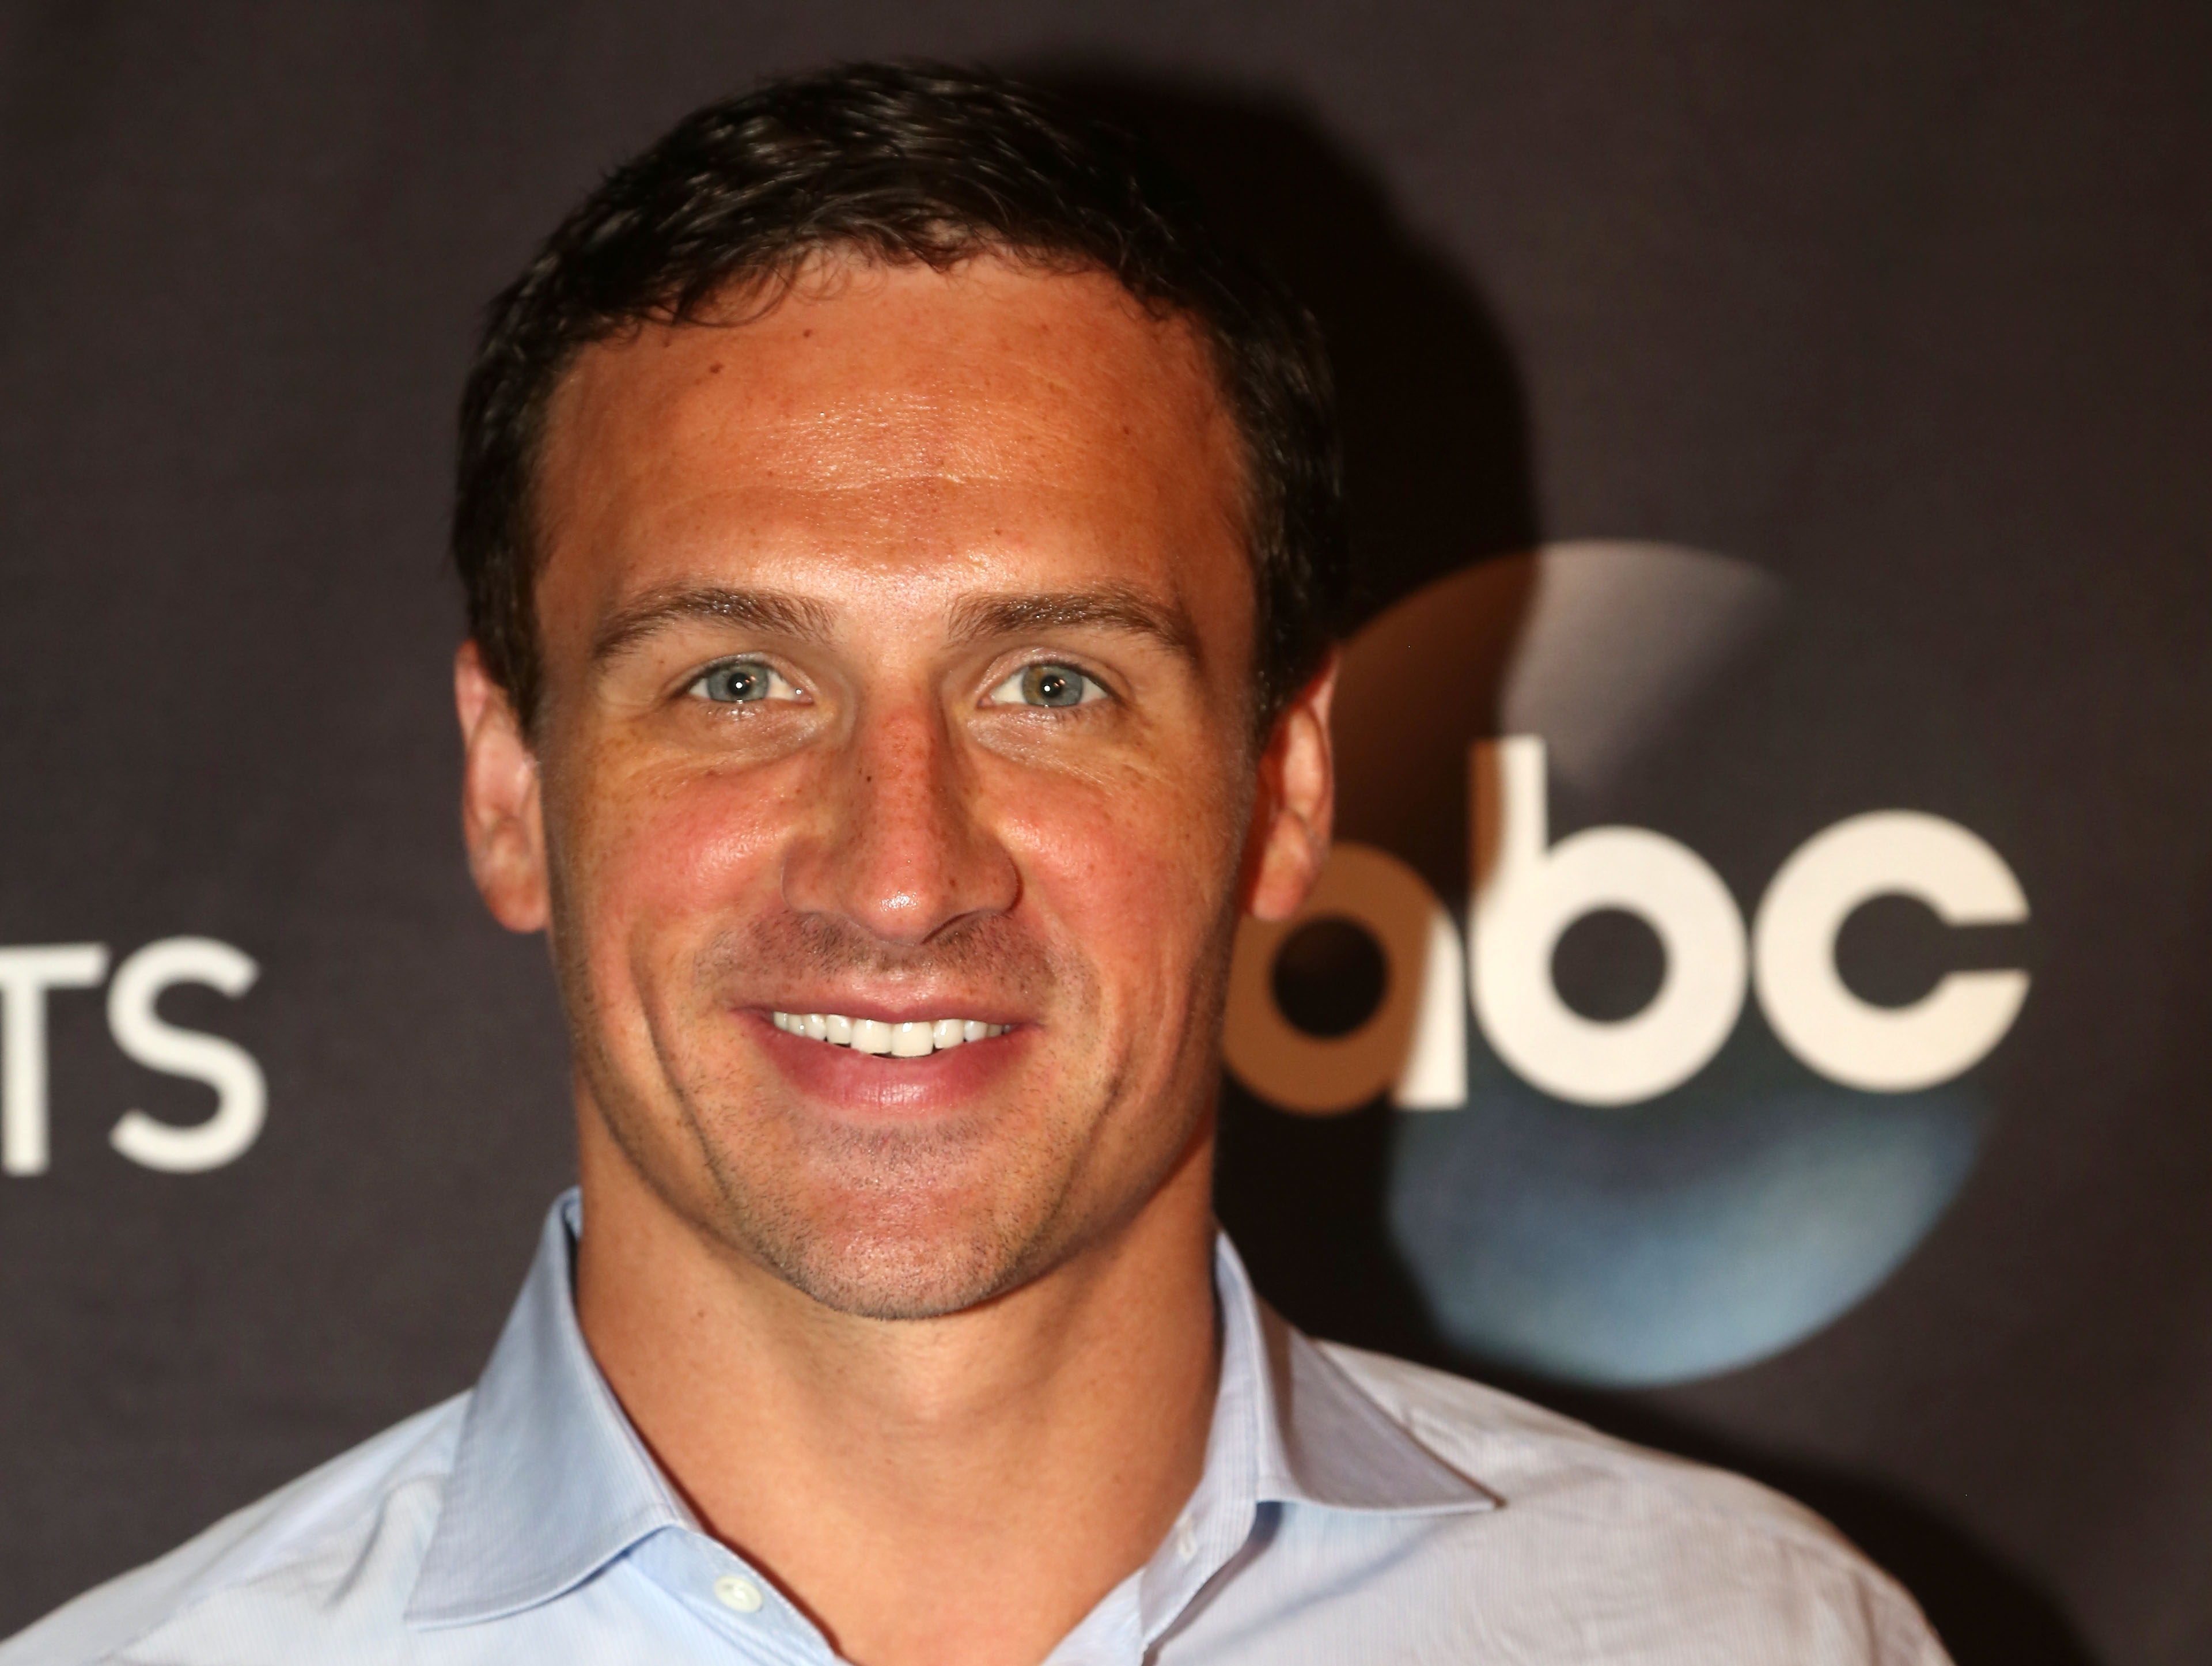 Ryan Lochte poses as Season 23 of "Dancing With The Stars" meets the press at Planet Hollywood Times Square on September 7, 2016 in New York City. (Bruce Glikas&mdash;Getty Images)